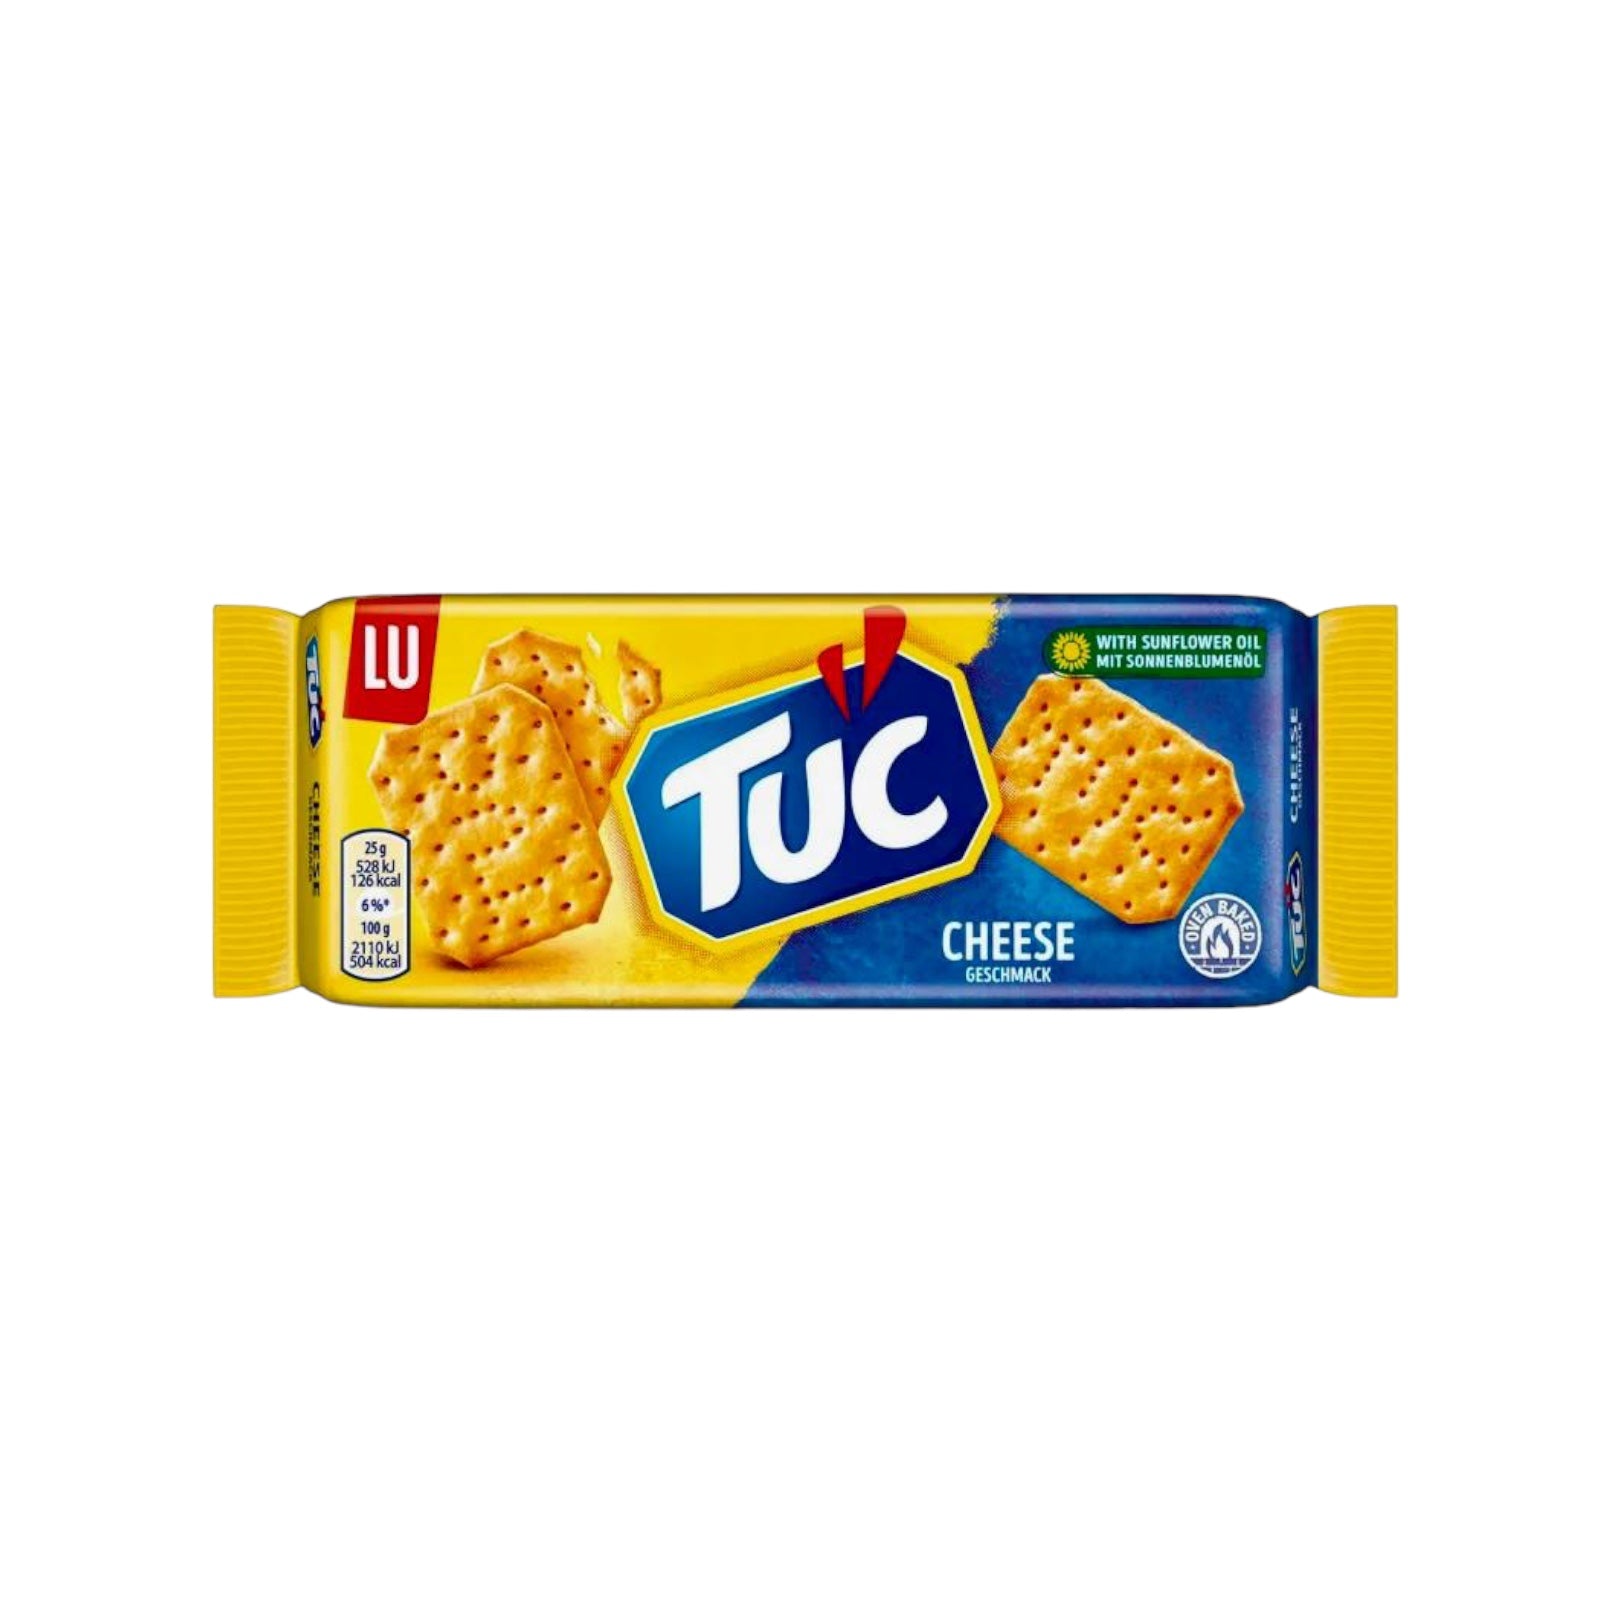 Tuc Crackers With Cheese Flavor 100g